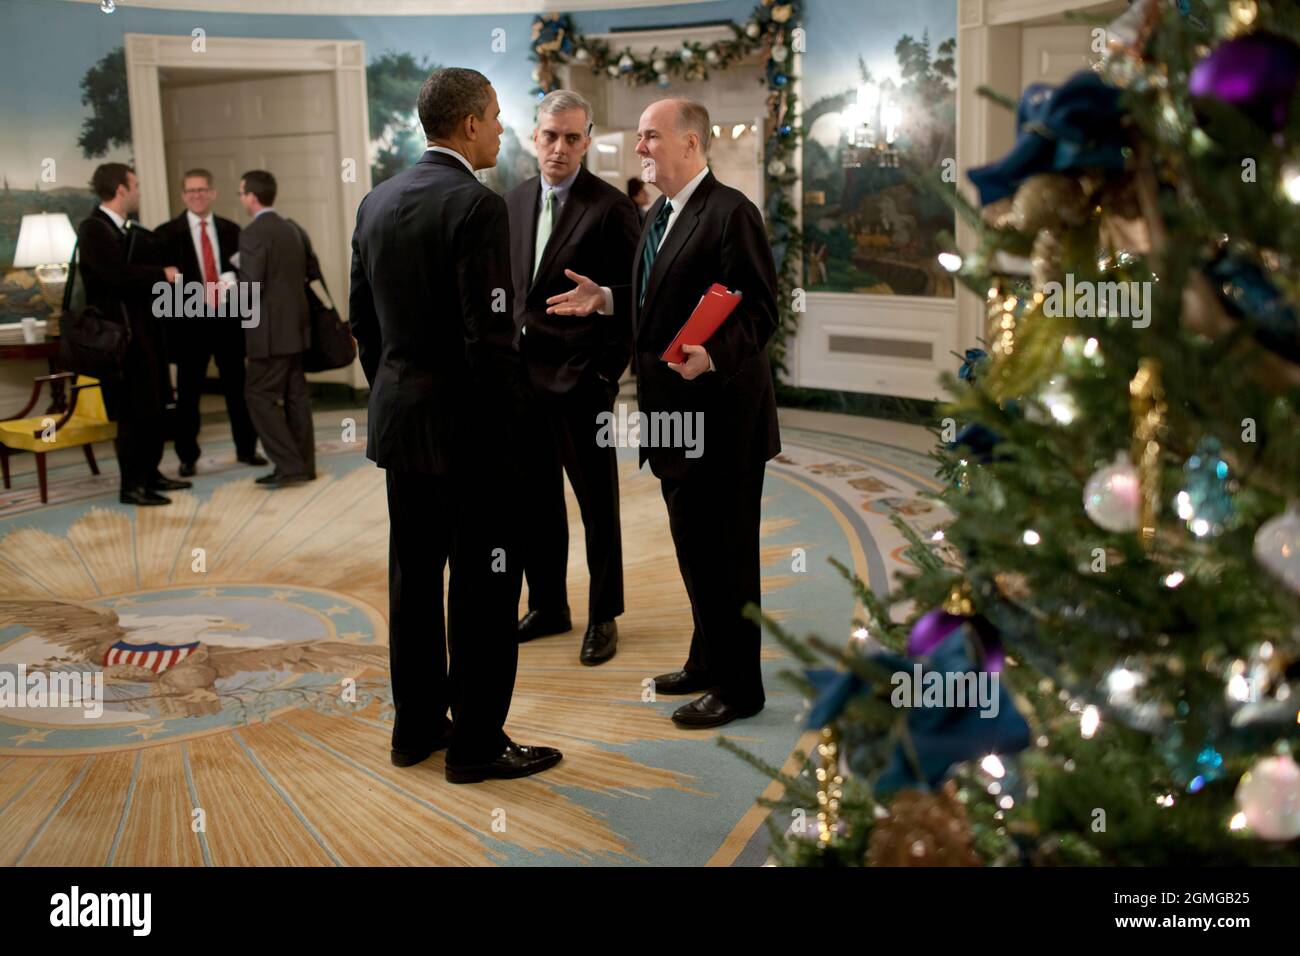 President Barack Obama talks with Deputy National Security Advisor Denis McDonough and National Security Advisor Tom Donilon in the Diplomatic Reception Room of the White House, before departing for Osawatomie, Kan., Dec. 6, 2011. (Official White House Photo by Pete Souza) This official White House photograph is being made available only for publication by news organizations and/or for personal use printing by the subject(s) of the photograph. The photograph may not be manipulated in any way and may not be used in commercial or political materials, advertisements, emails, products, promotions Stock Photo